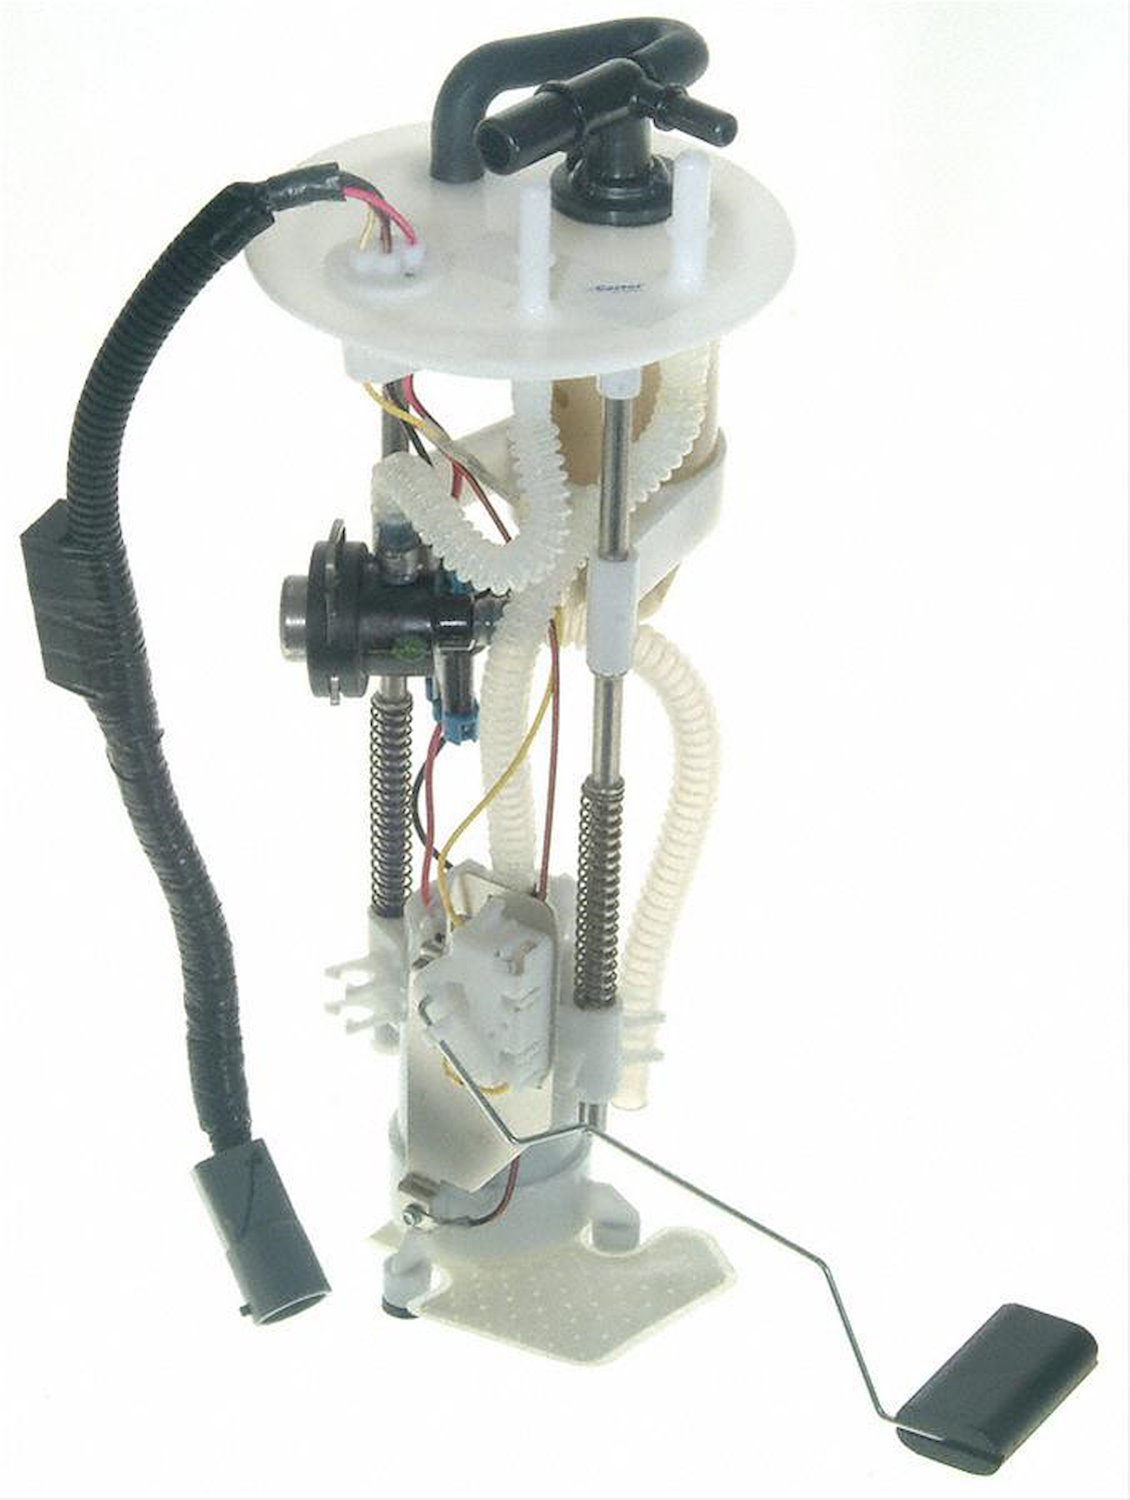 OE Ford Replacement Electric Fuel Pump Module Assembly 2002-03 Ford Ranger 3.0L